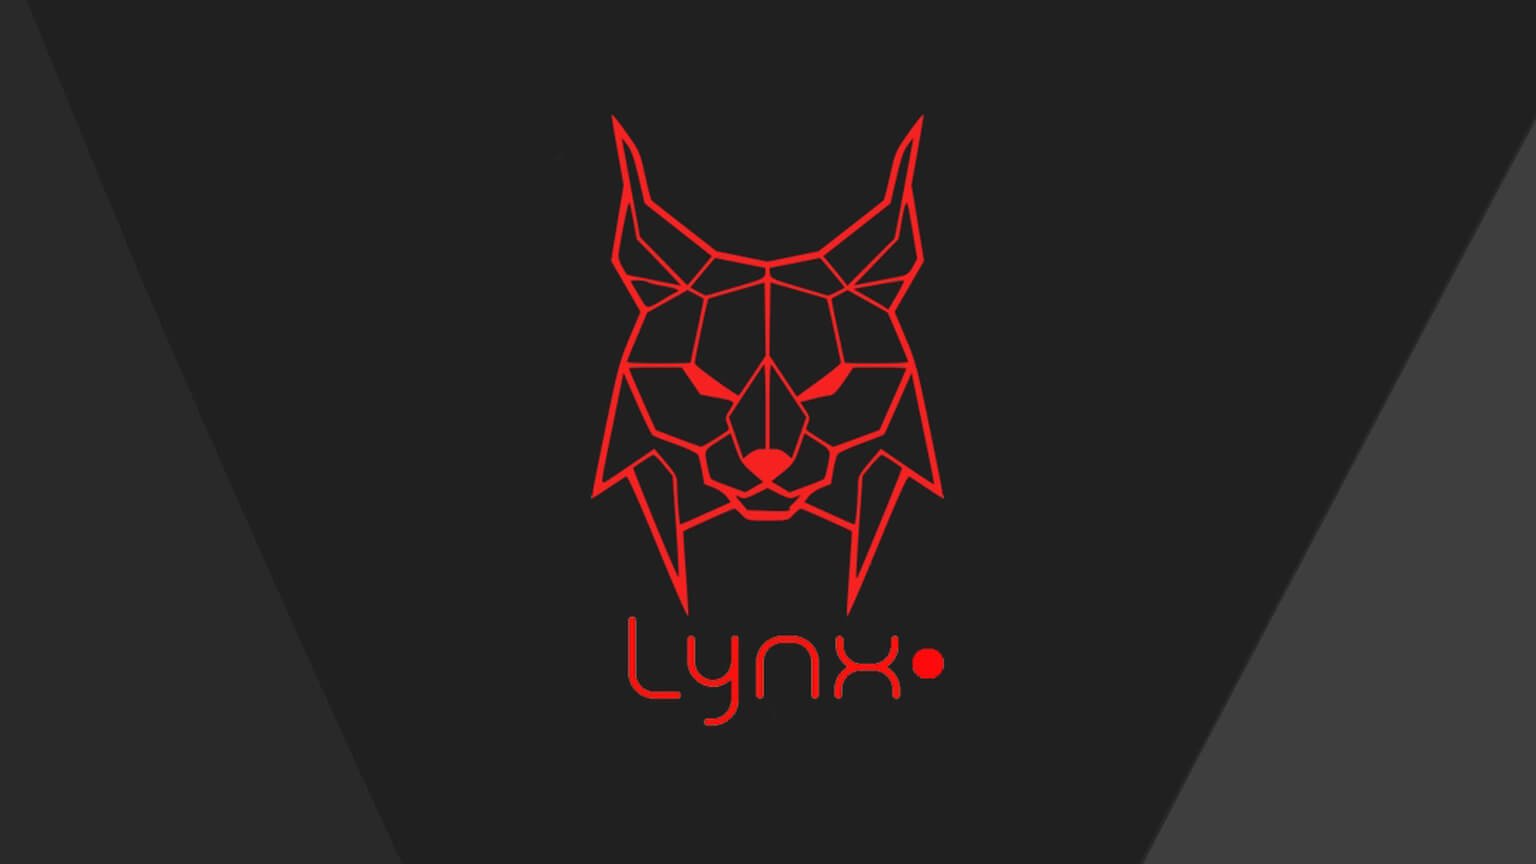 Lynx Remix APK (Android App) Free Download, 44% OFF